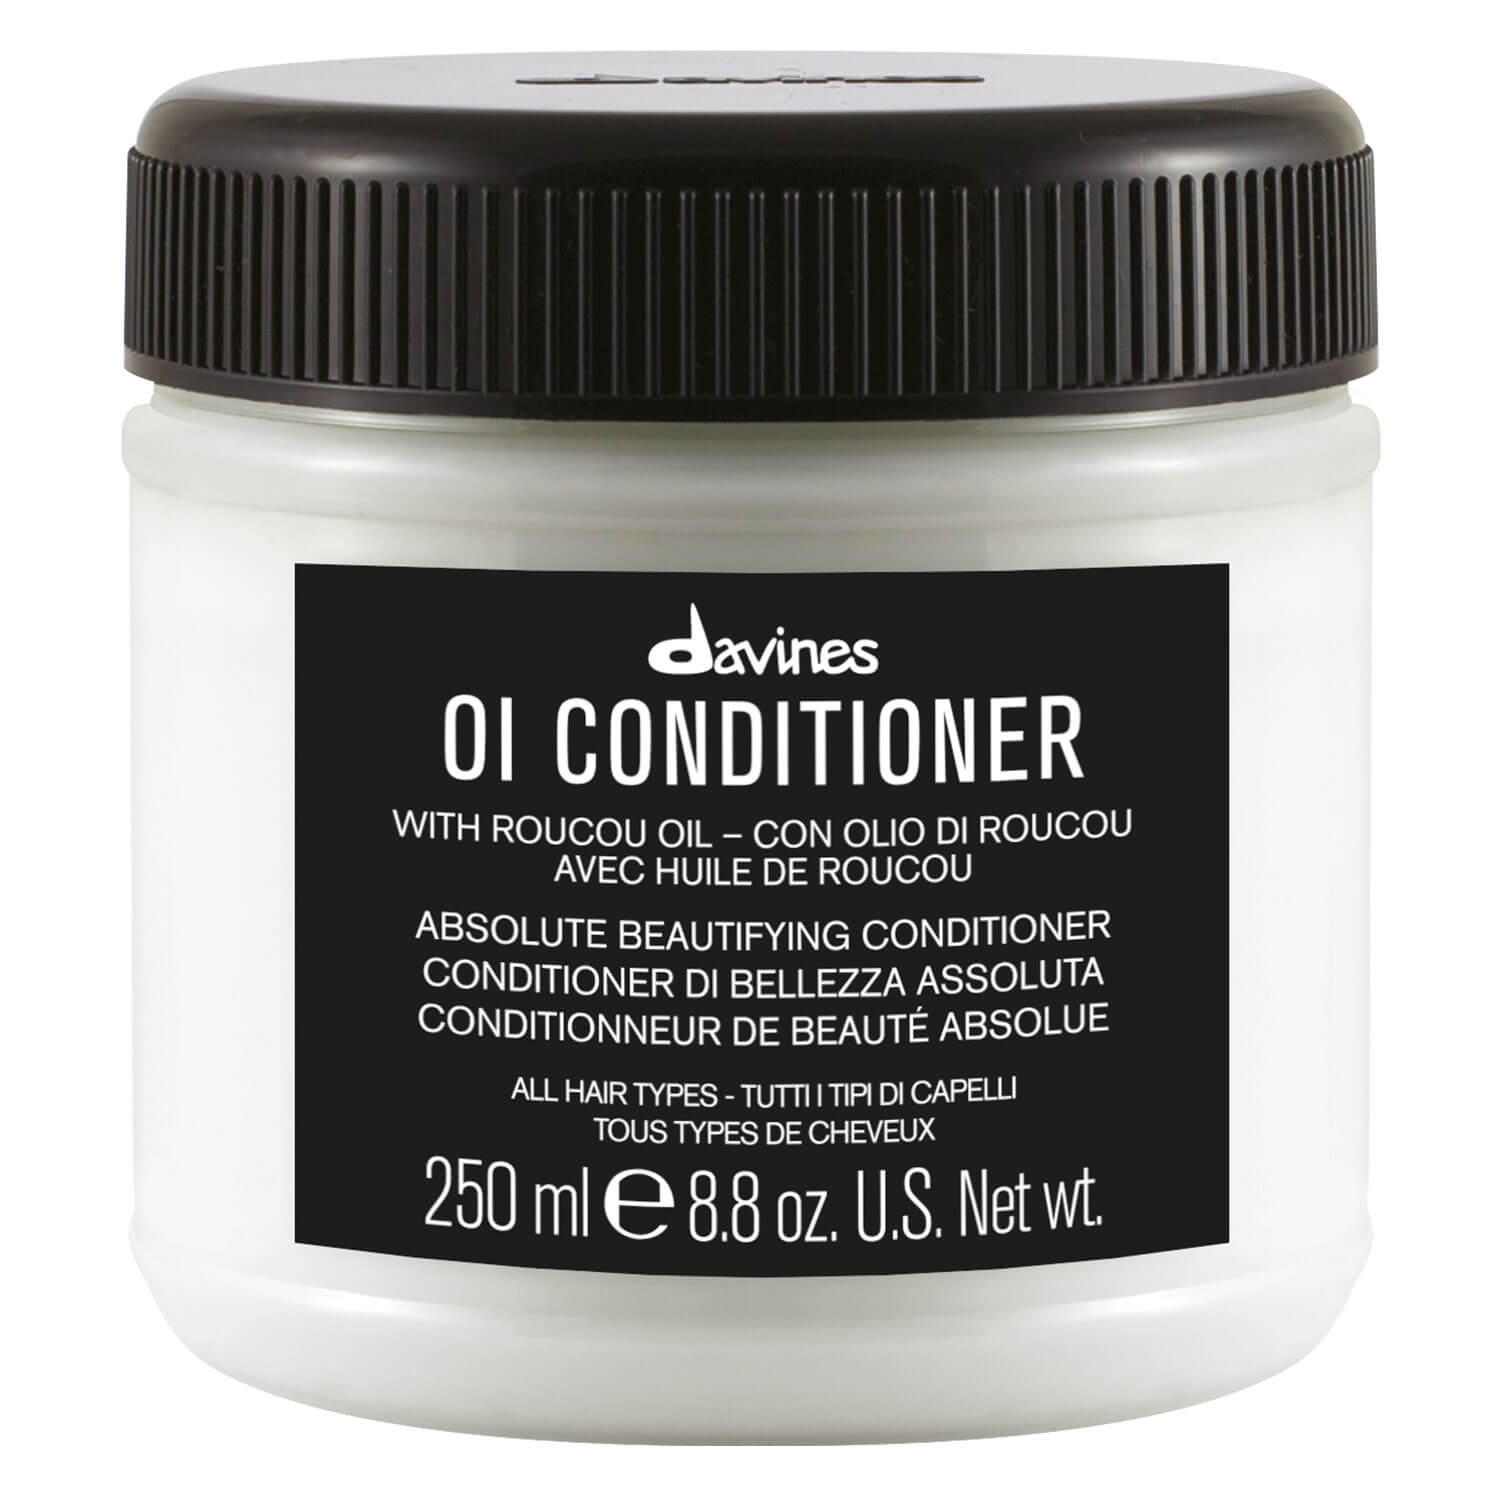 Product image from Oi - Absolute Beautifying Conditioner